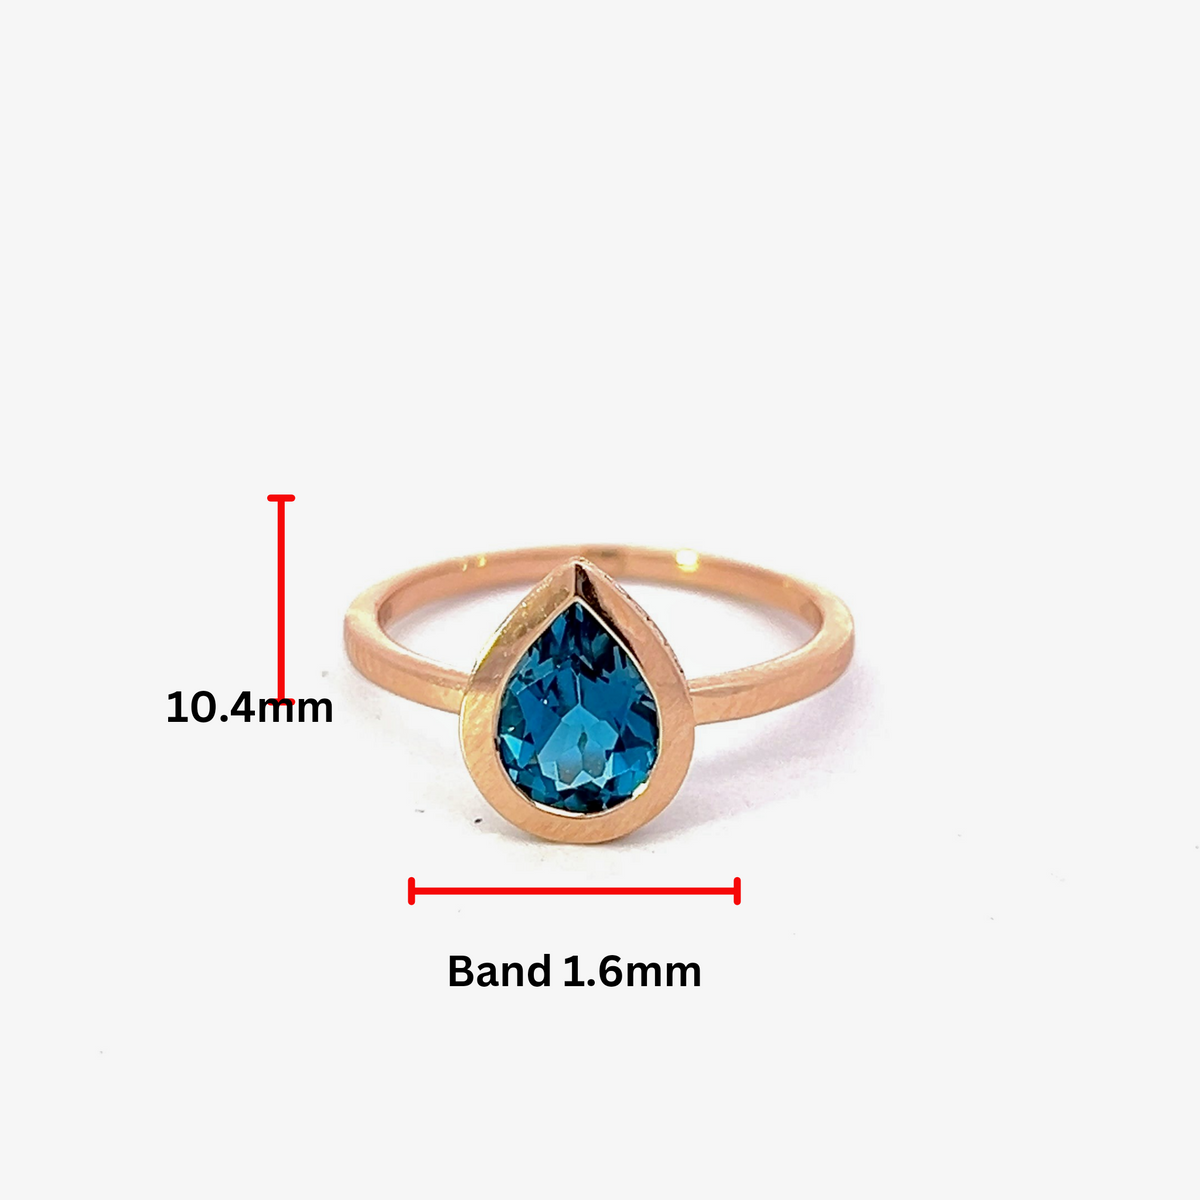 14K Rose Gold 0.91cttw Blue Topaz and 0.09cttw Diamond Ring - Size 6